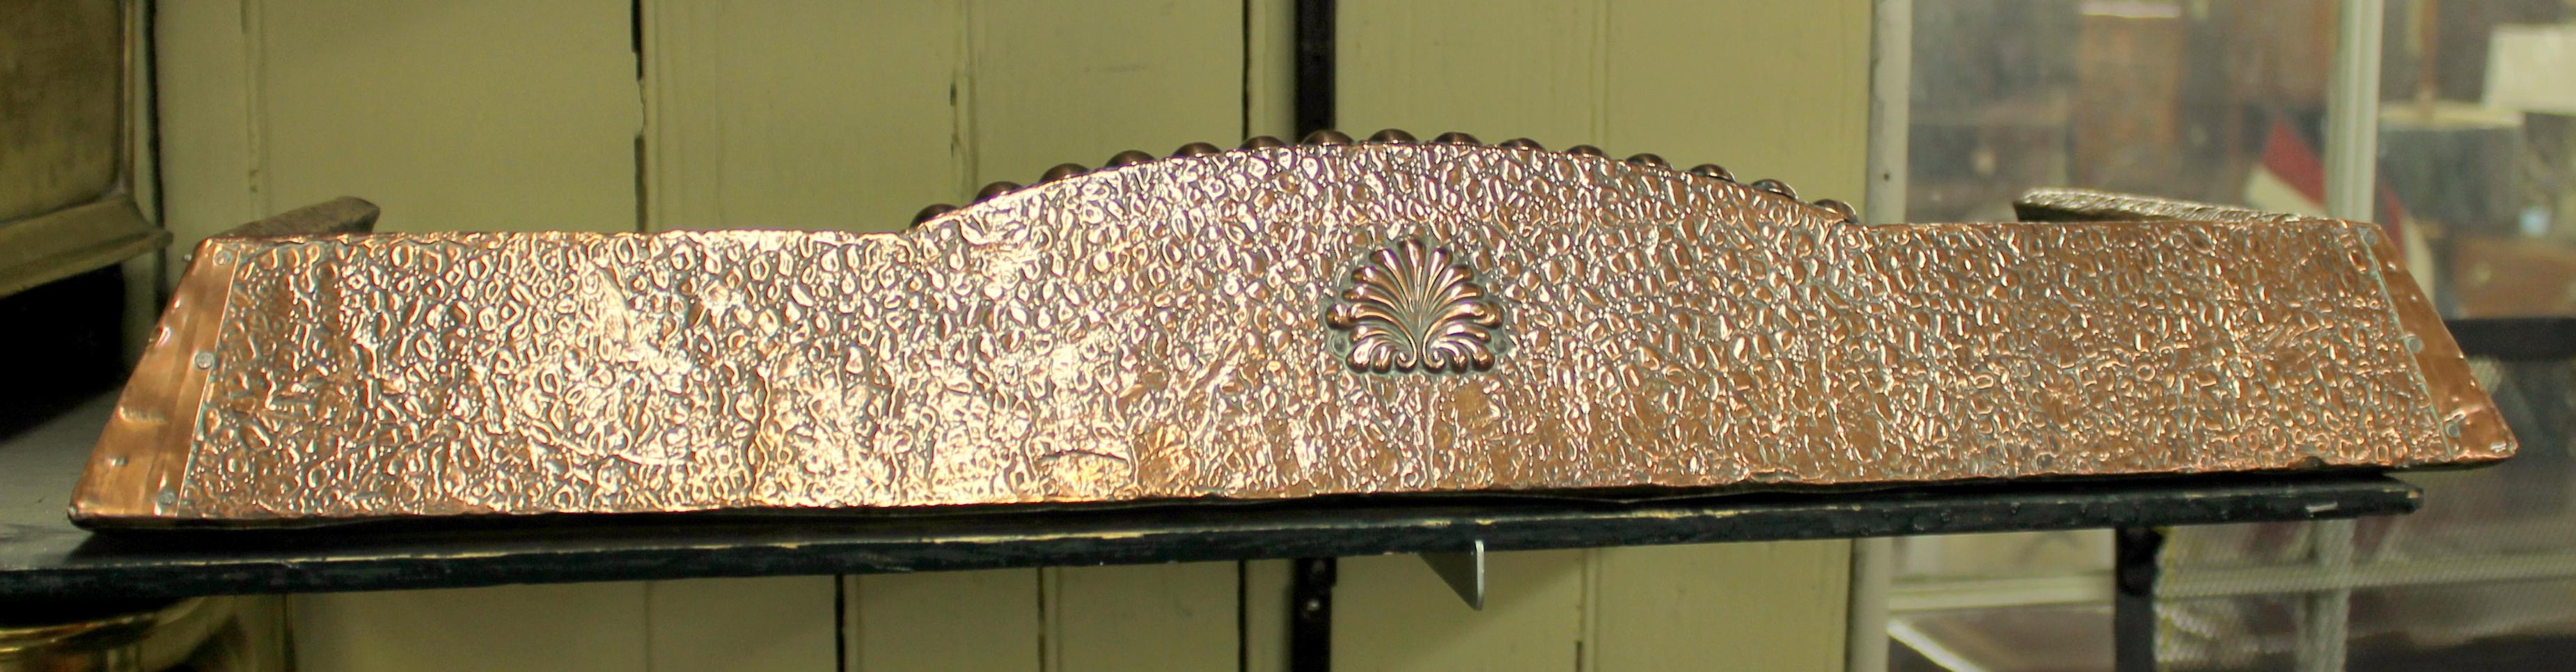 Antique English Arts & Crafts handmade copper fireplace fender, rare small size.

Attributed to the Arts & Crafts specialist maker Joseph Sankey and Sons, Bilston, Staffordshire
(famous for 